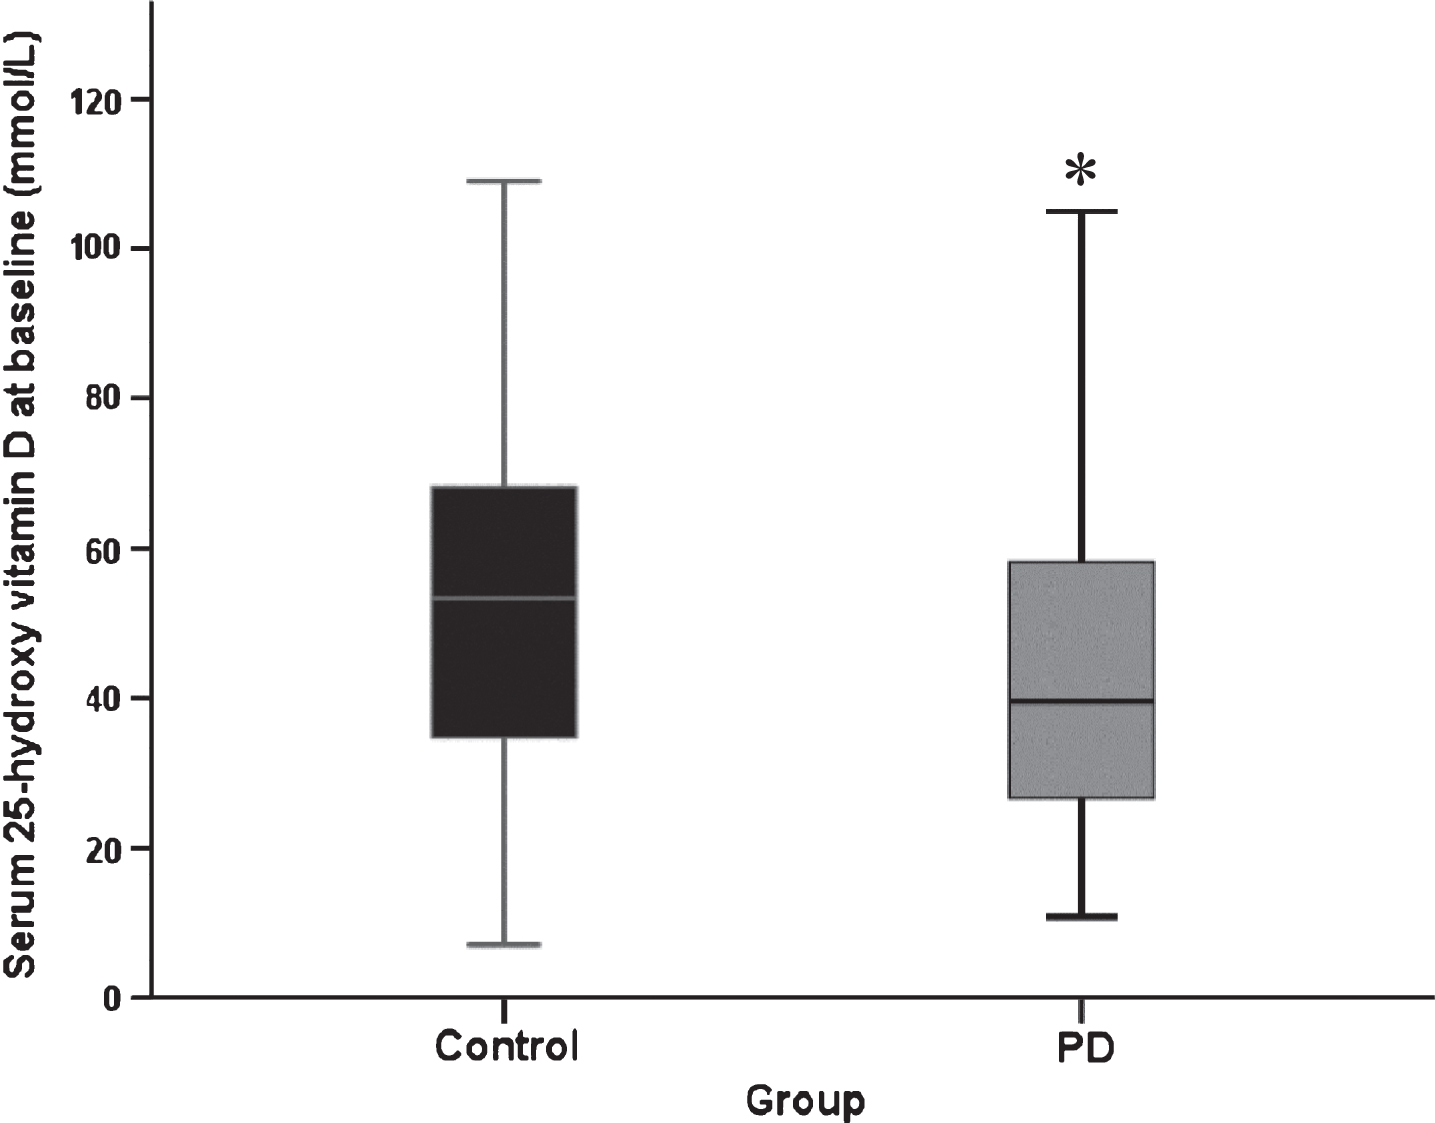 Serum 25(OH)D concentration at baseline (PD, n = 145, control n = 94. Data represent median±95% confidence interval. *p = 0.02 versus control participants (Mann Whitney U test).